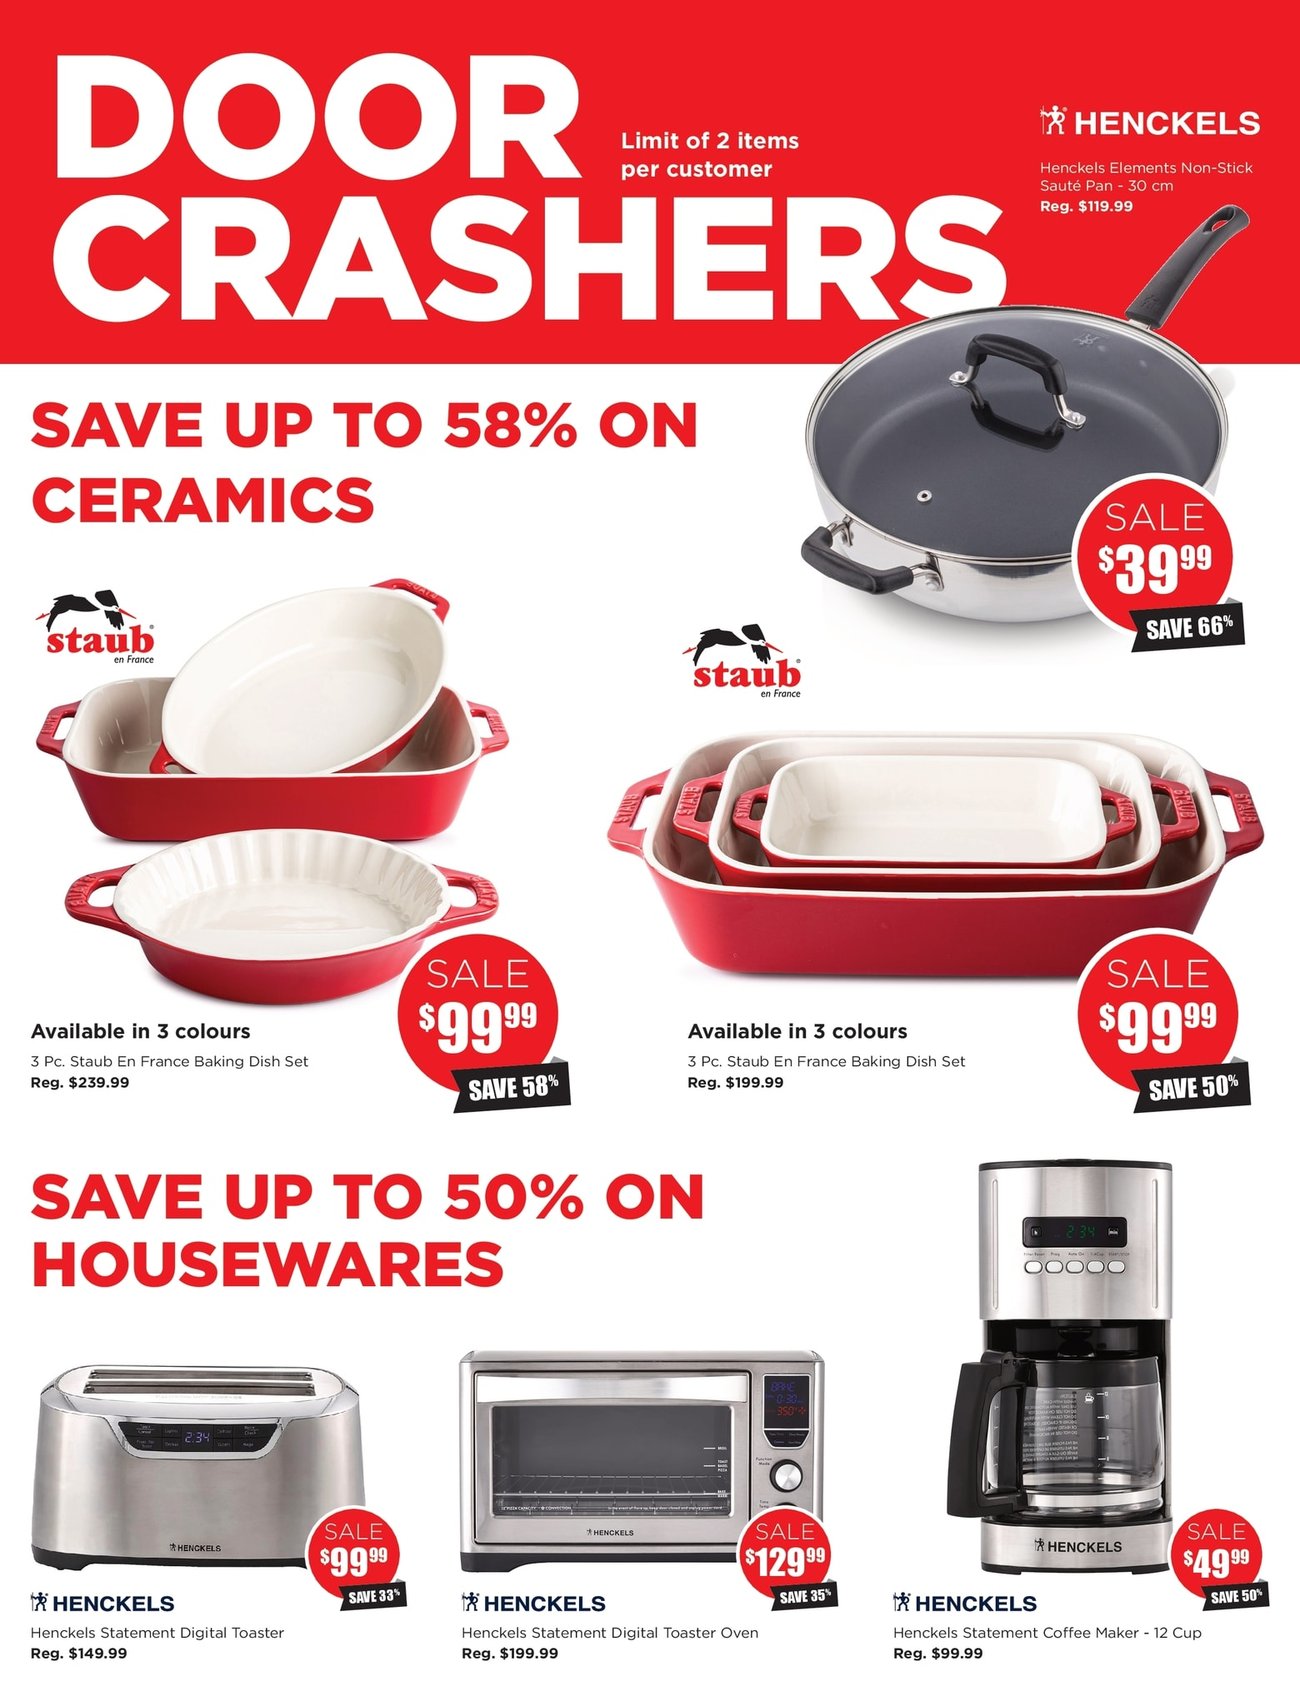 Kitchen Stuff Plus - Everything Cooking Sale - Page 3